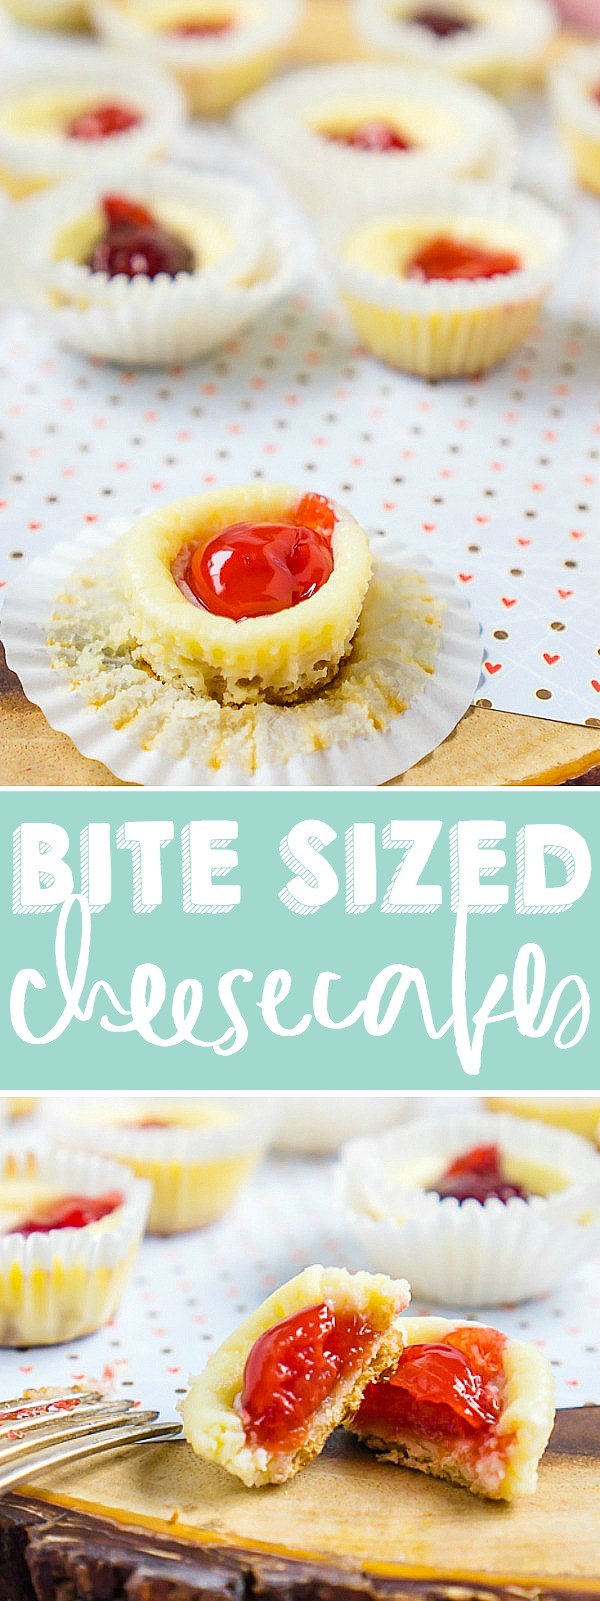 These Mini Cheesecakes offer a simple but creamy, delicious bite sized dessert that is always a crowd favorite dessert recipe! With a classic cheesecake filling and Nilla Wafer crust, these are easy to make and even easier to customize for any season or holiday! Mini cheesecakes make the perfect holiday dessert! | THE LOVE NERDS #christmasdessert #holidaydessert #bitesized 